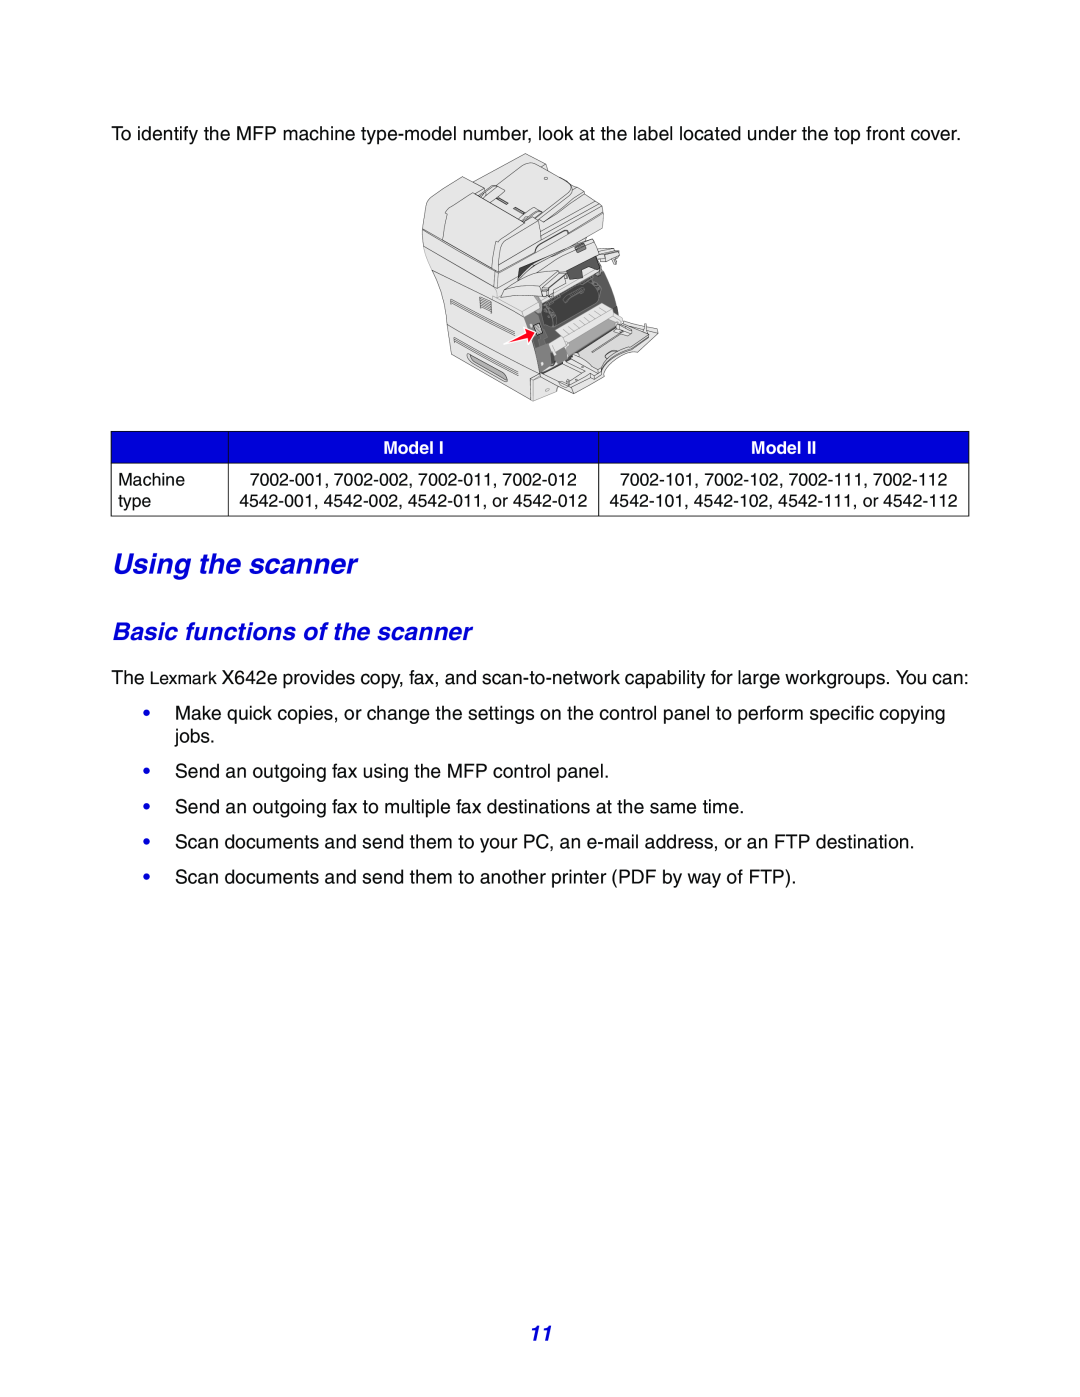 Lexmark X642e manual Using the scanner, Basic functions of the scanner 